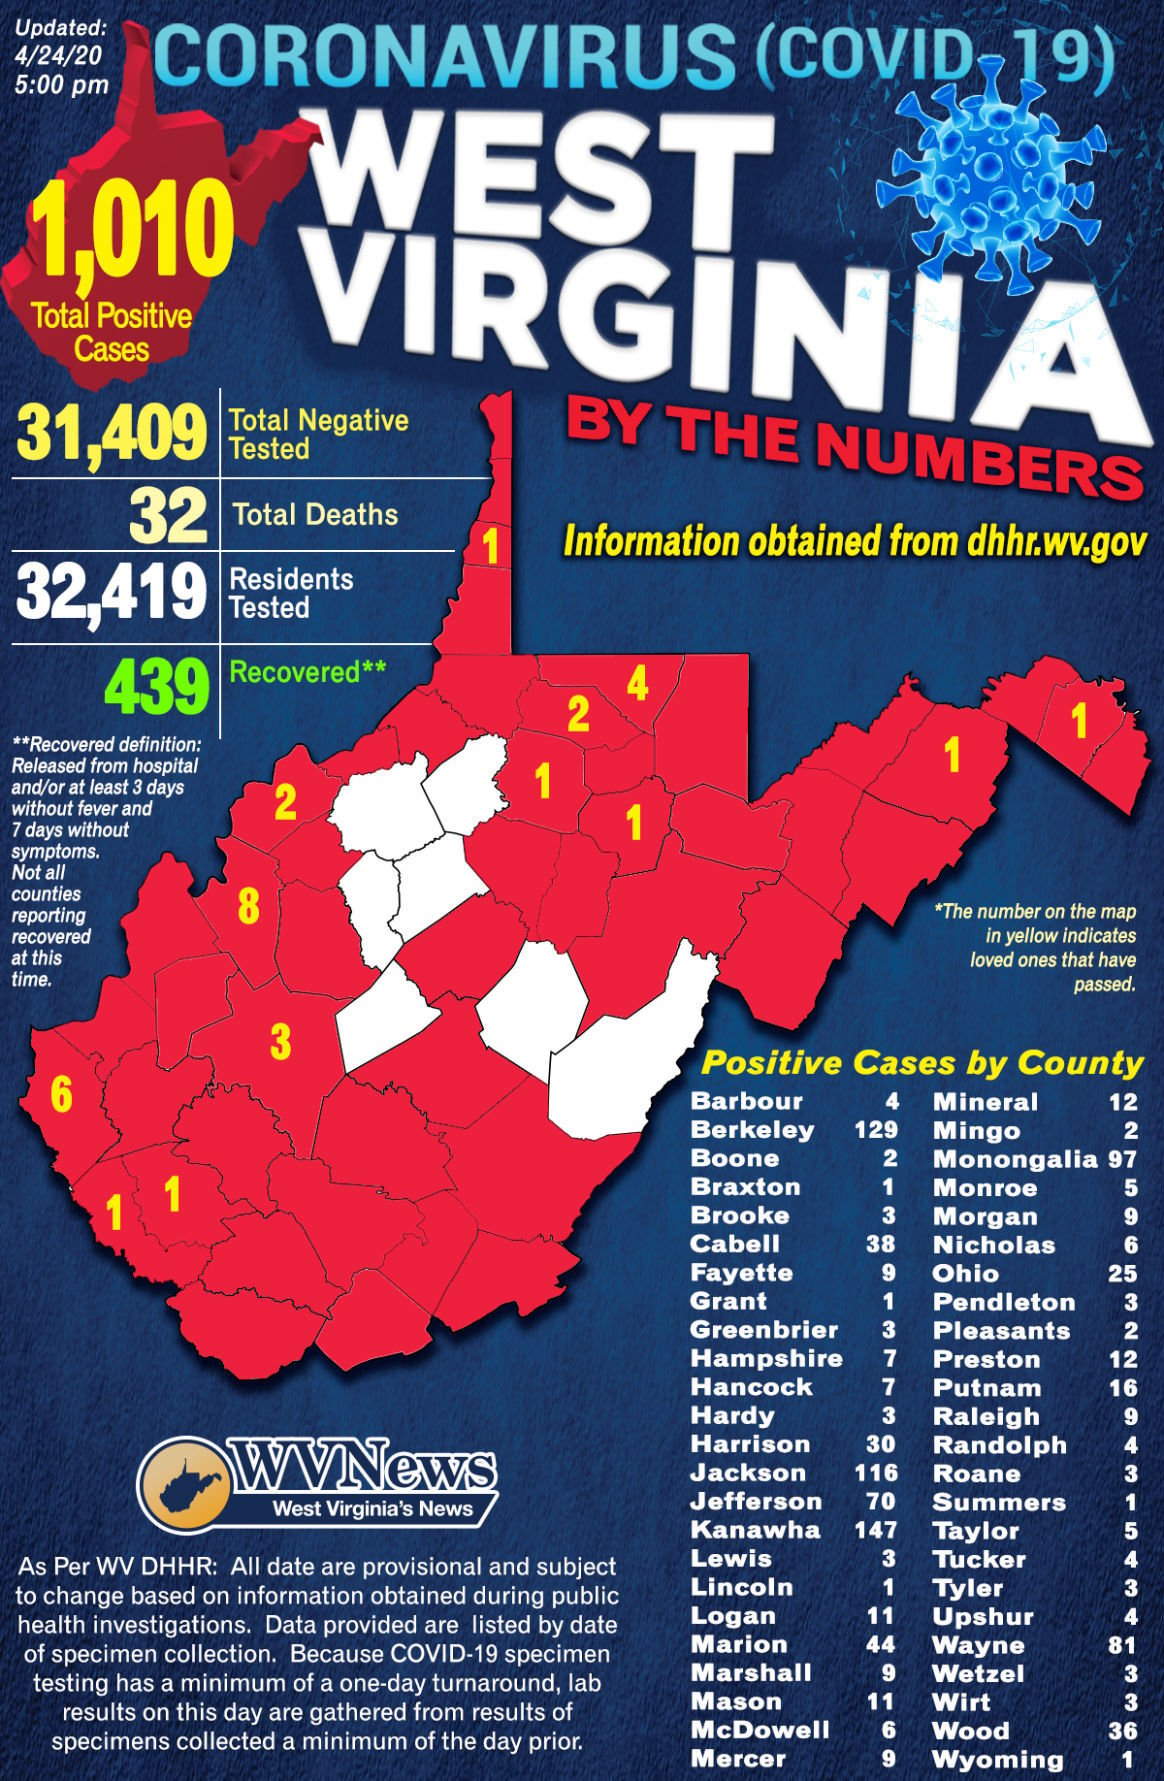 WV's COVID19 cases top 1,000 as large numbers of tests reported WV